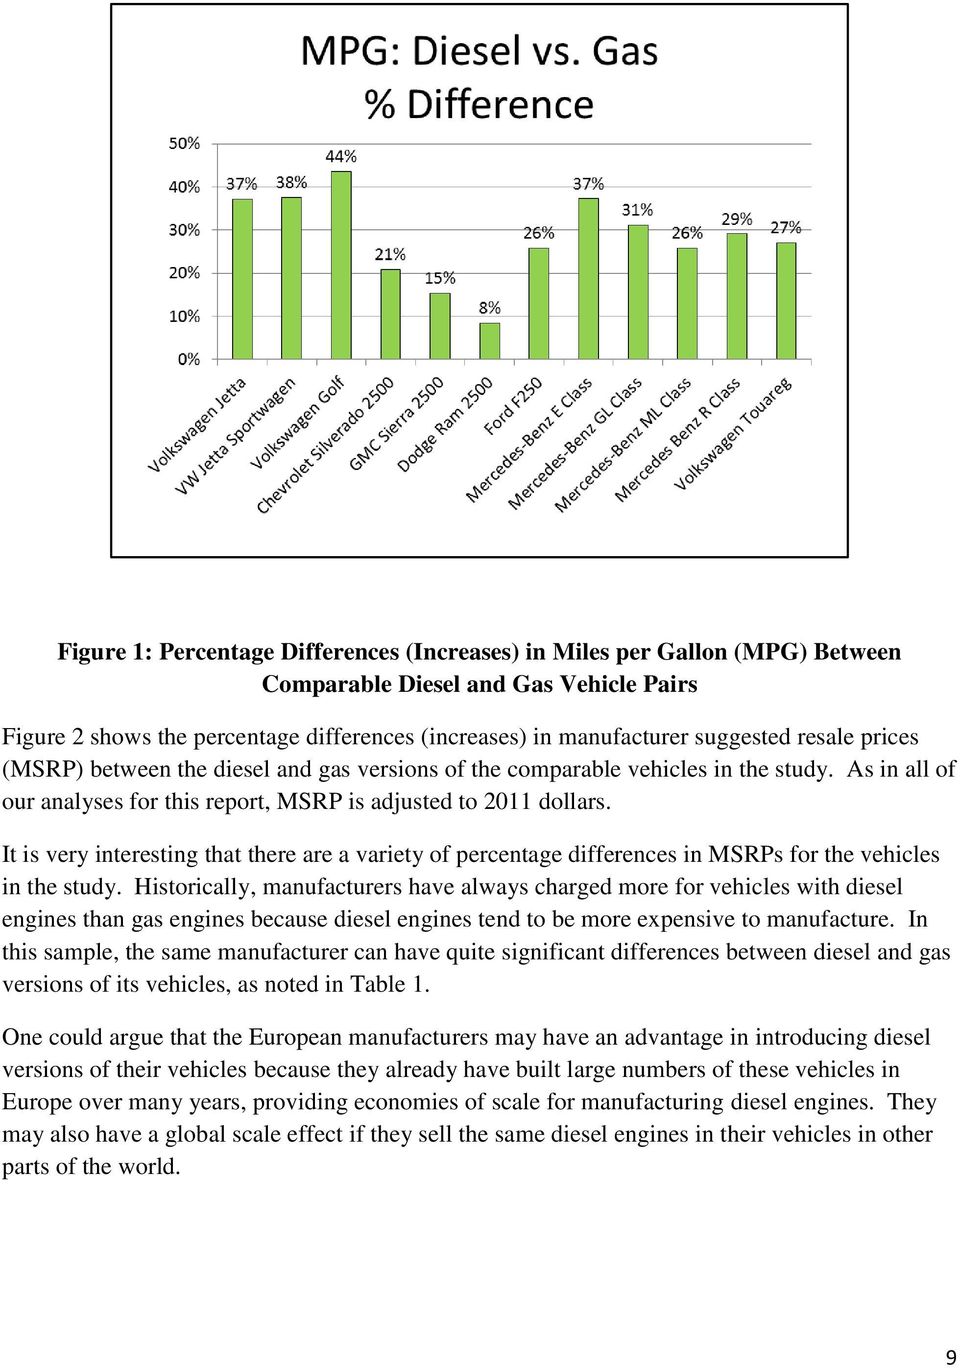 It is very interesting that there are a variety of percentage differences in MSRPs for the vehicles in the study.